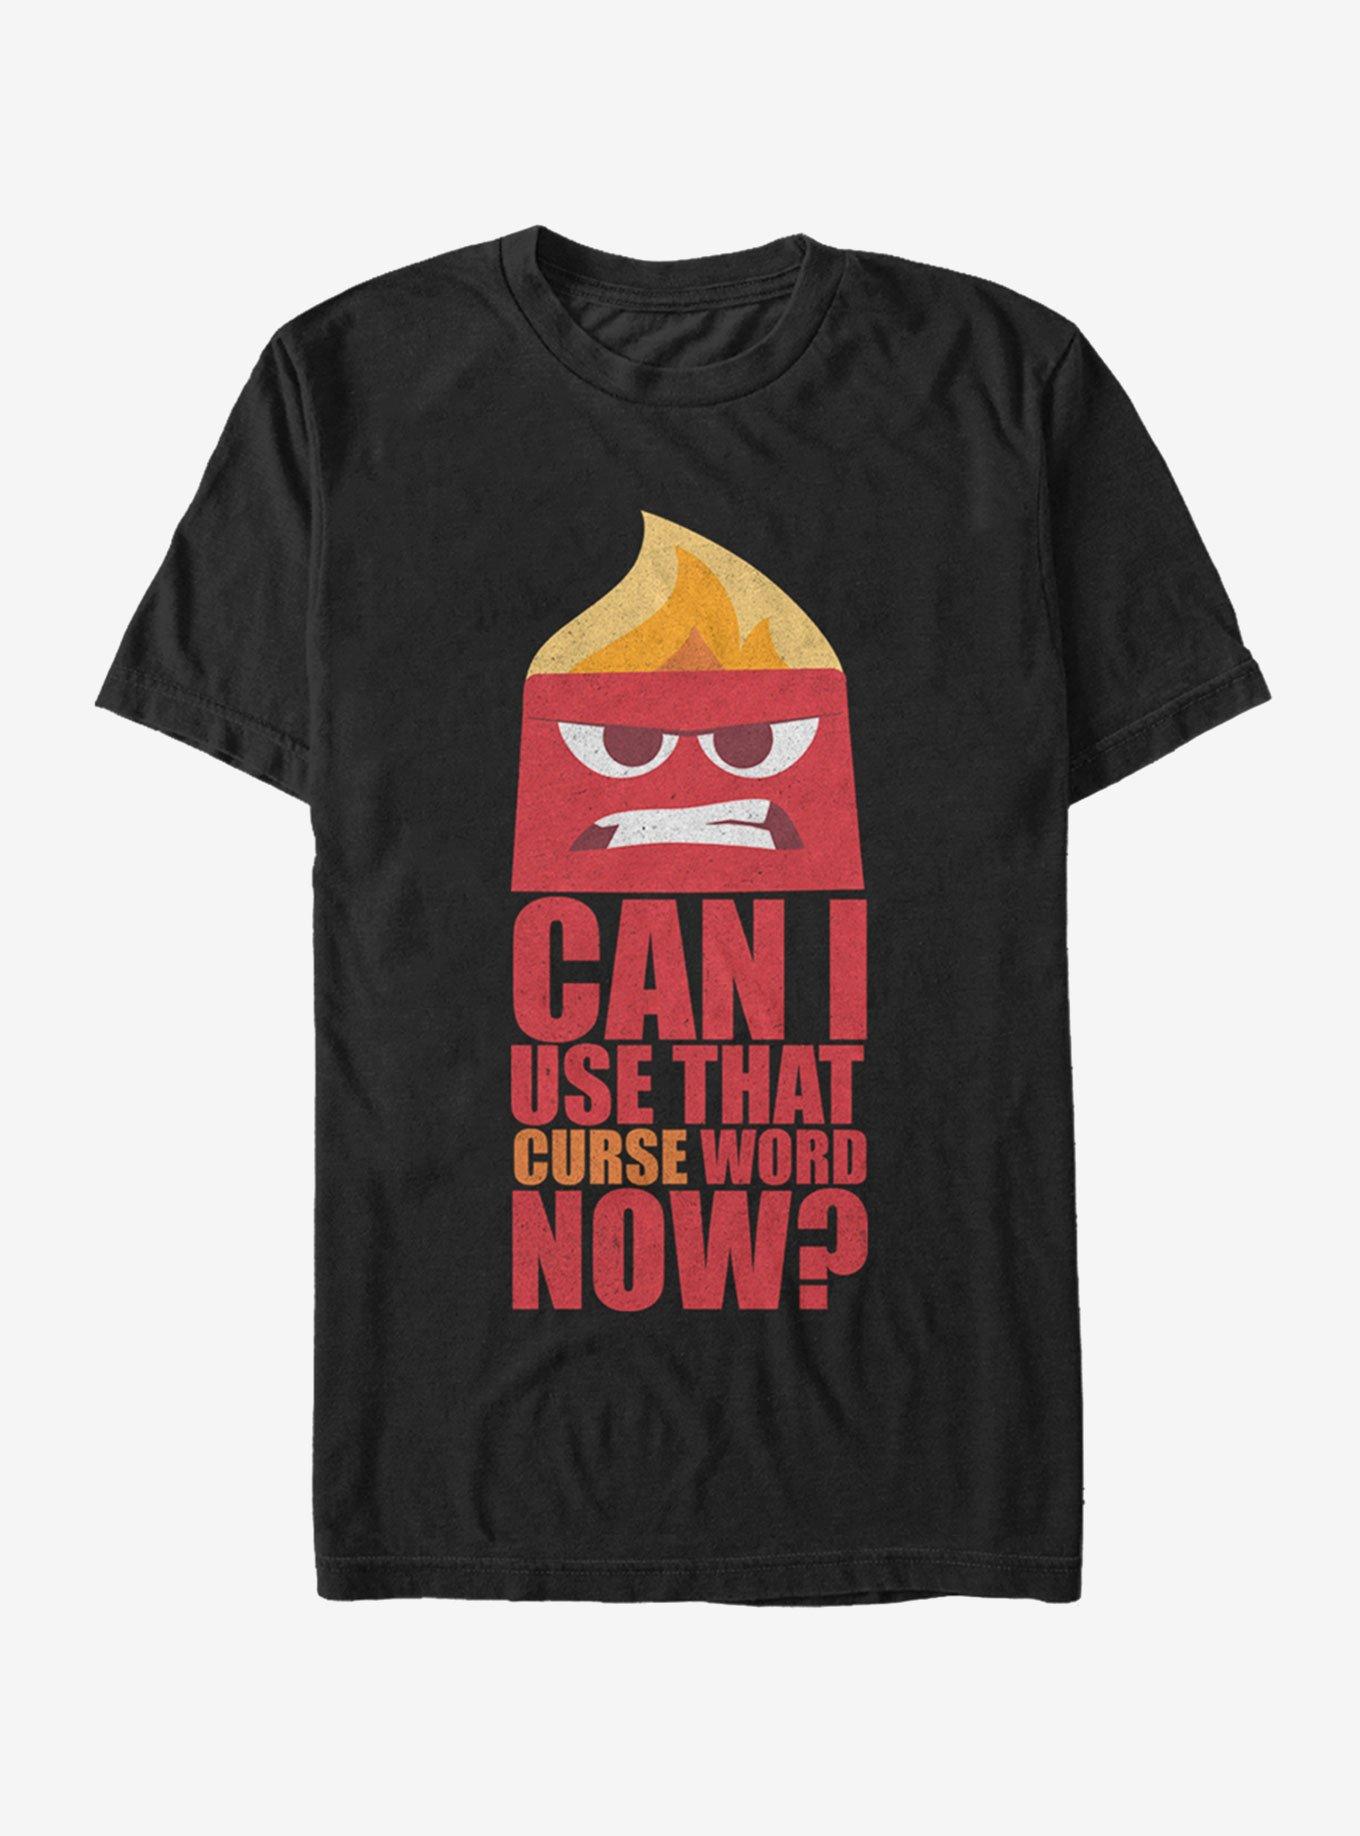 Disney Pixar Inside Out Anger Can I Use That Curse Word Now T-Shirt, BLACK, hi-res